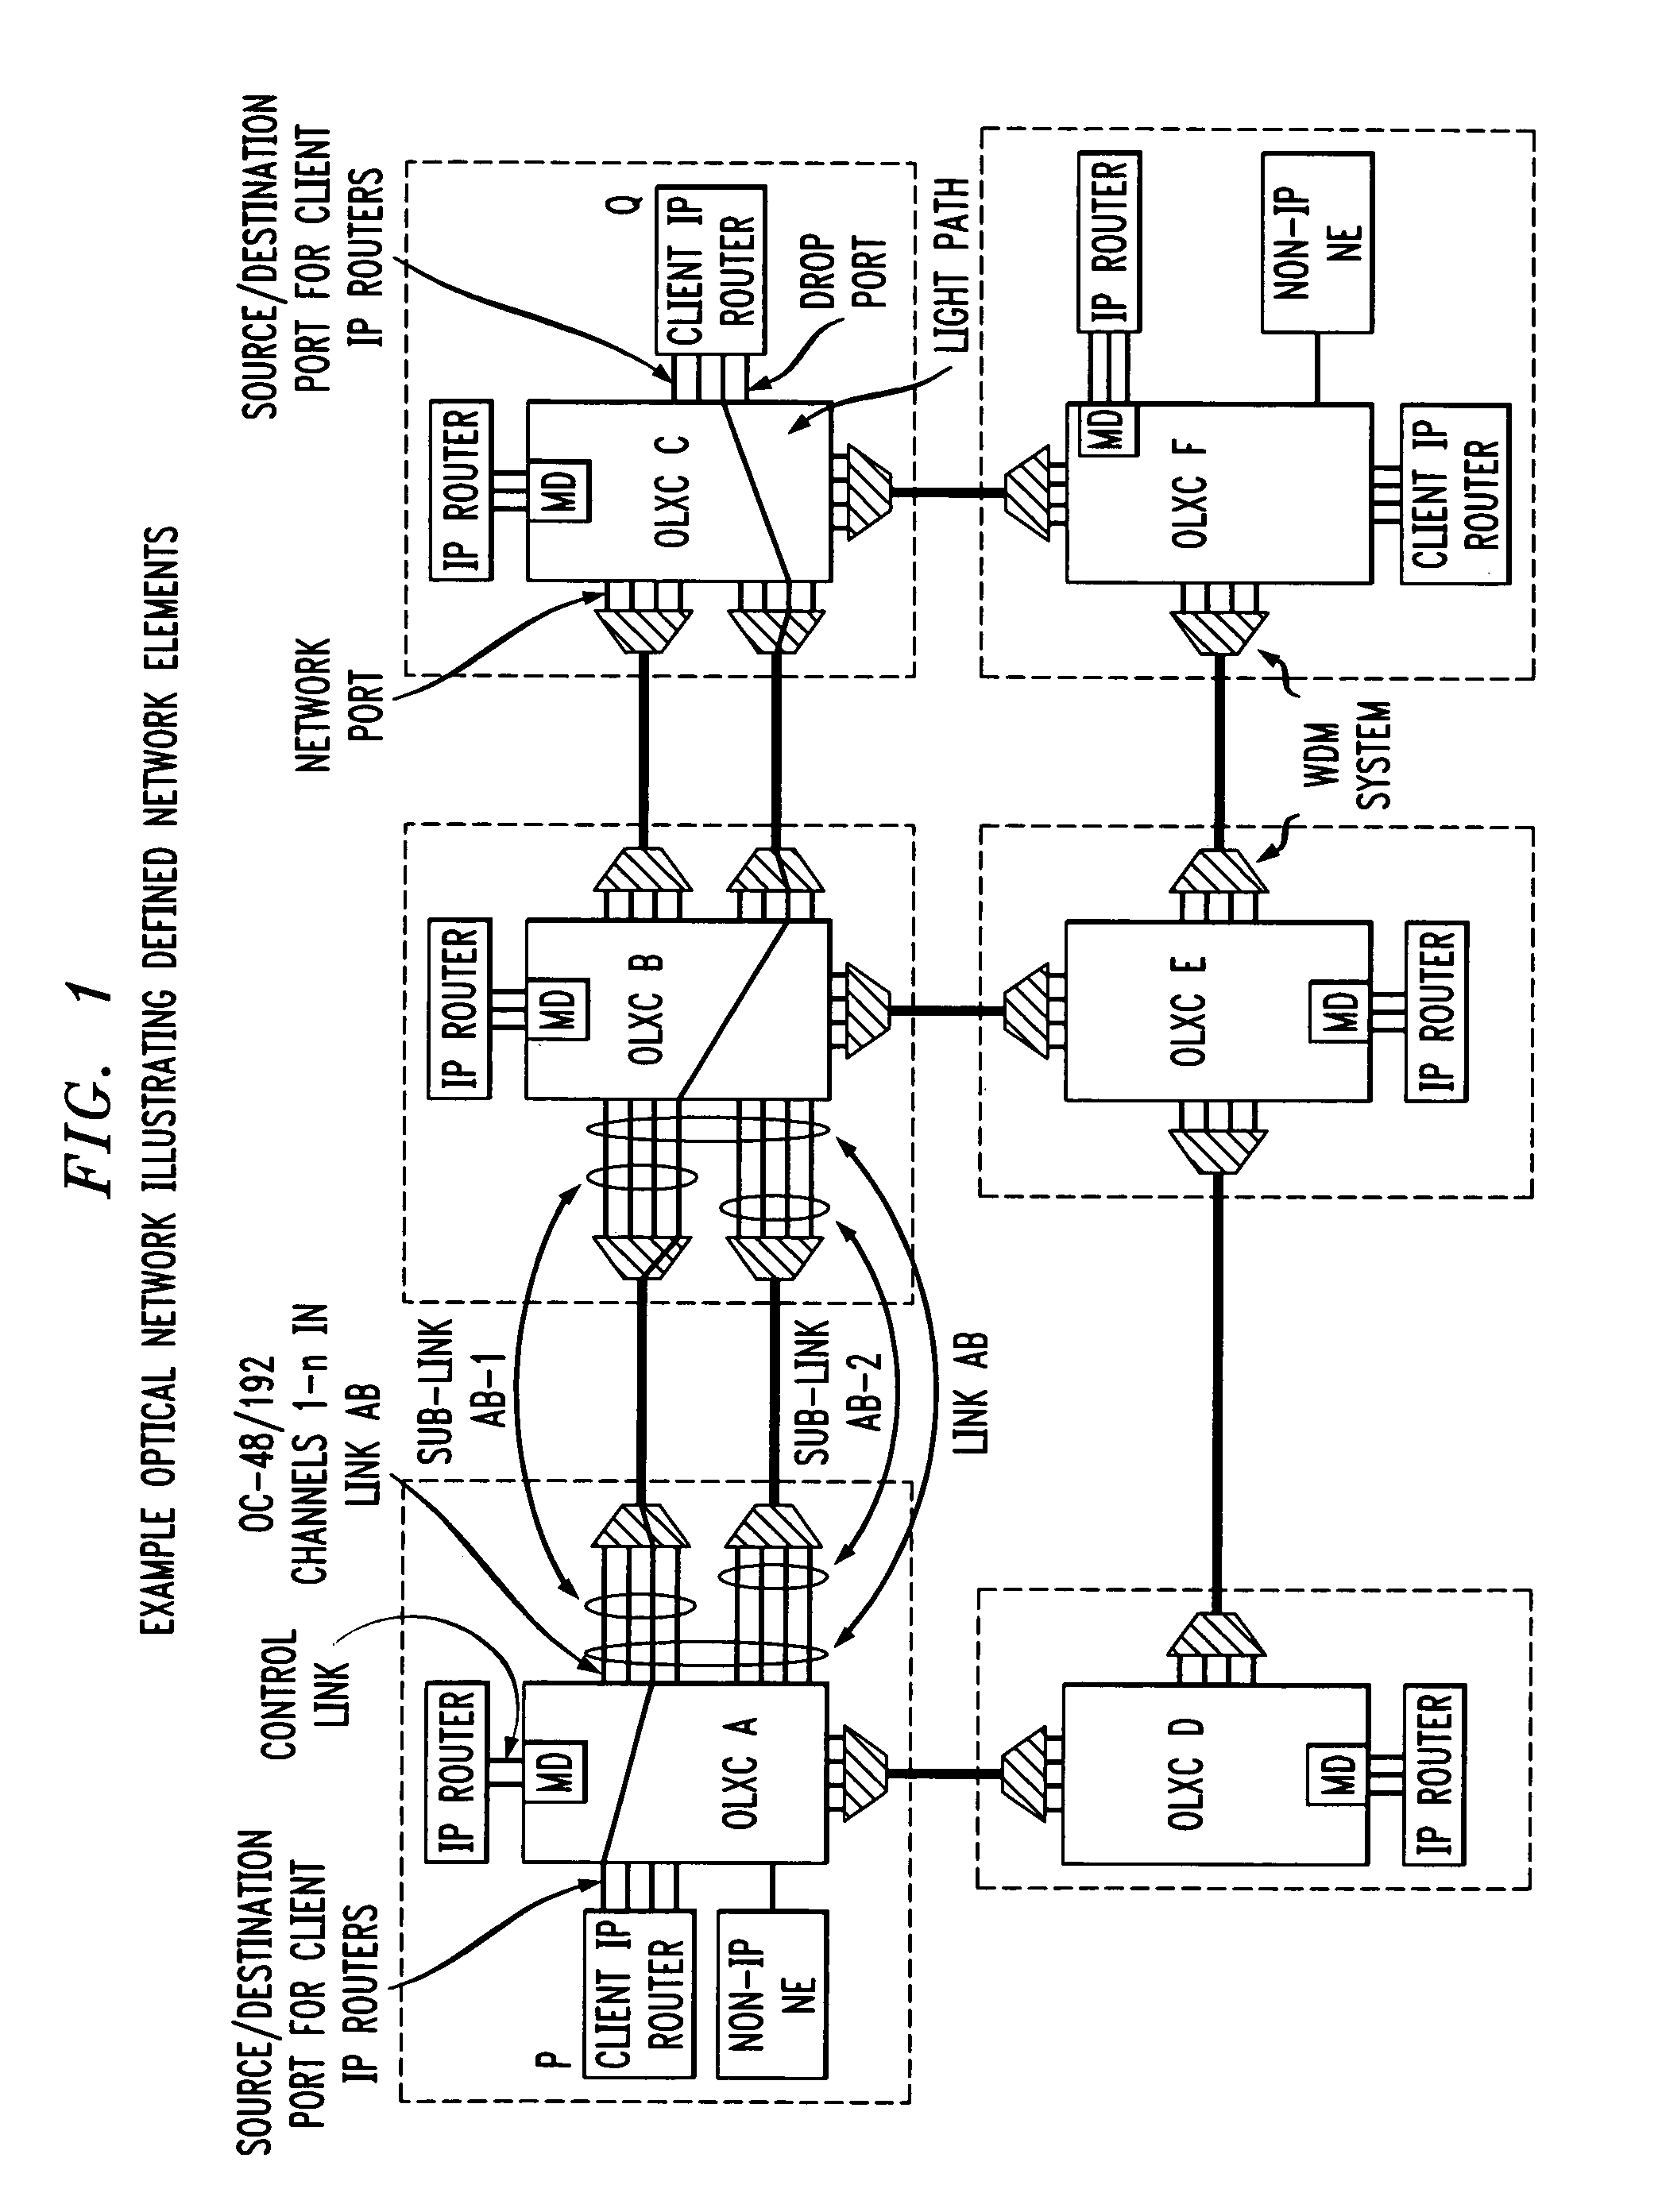 Control of optical connections in an optical network